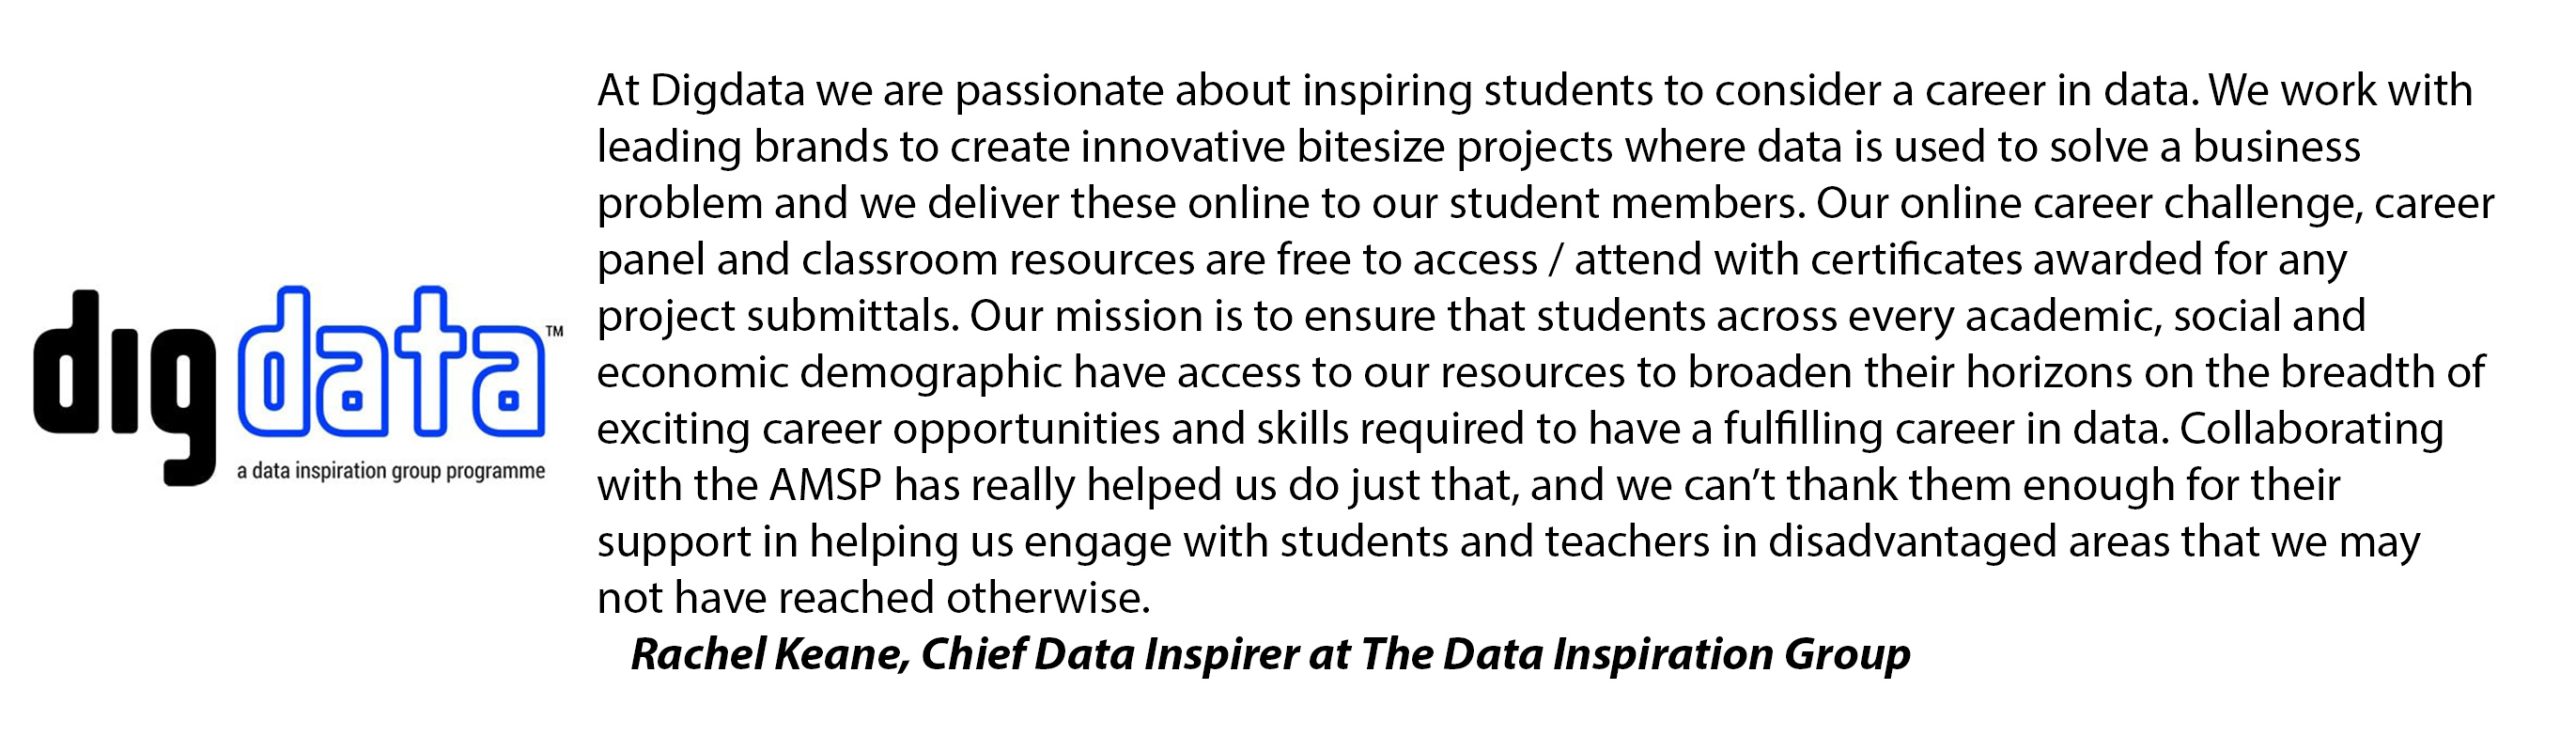 The dig data logo and a quote from Rachel Keane, chief data inspirer at the Data Inspiration Group